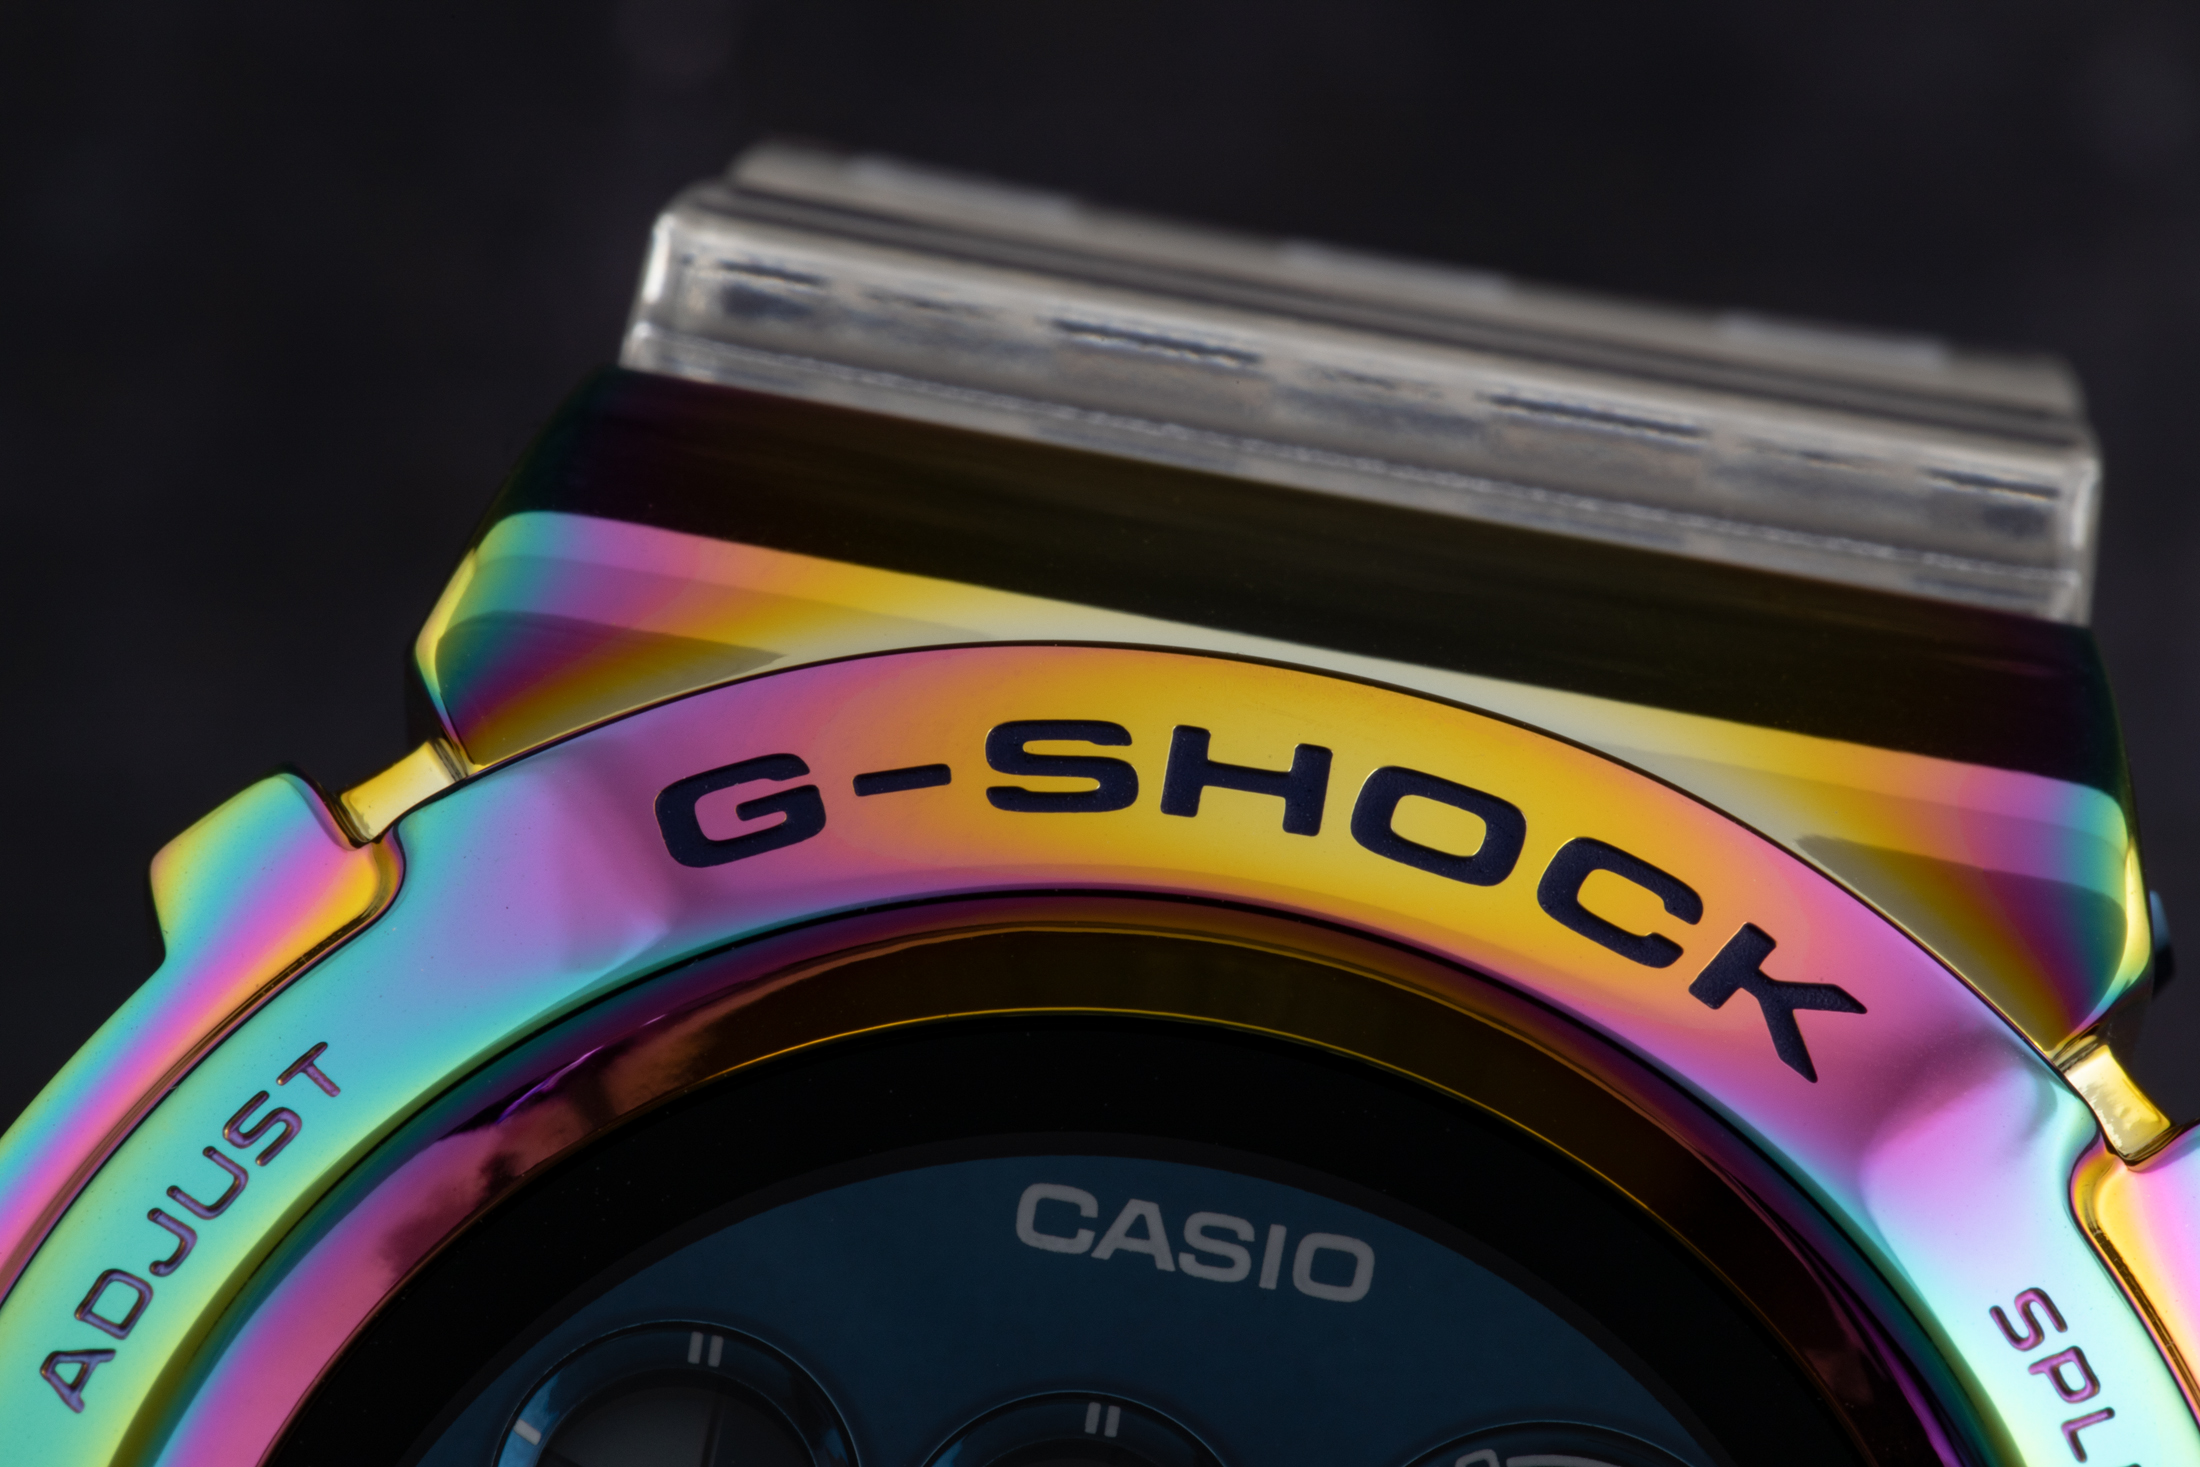 Introducing: The KITH For G-SHOCK GM-6900 レインボー 2021年新作（編集部撮り下ろし） -  Hodinkee Japan （ホディンキー 日本版）